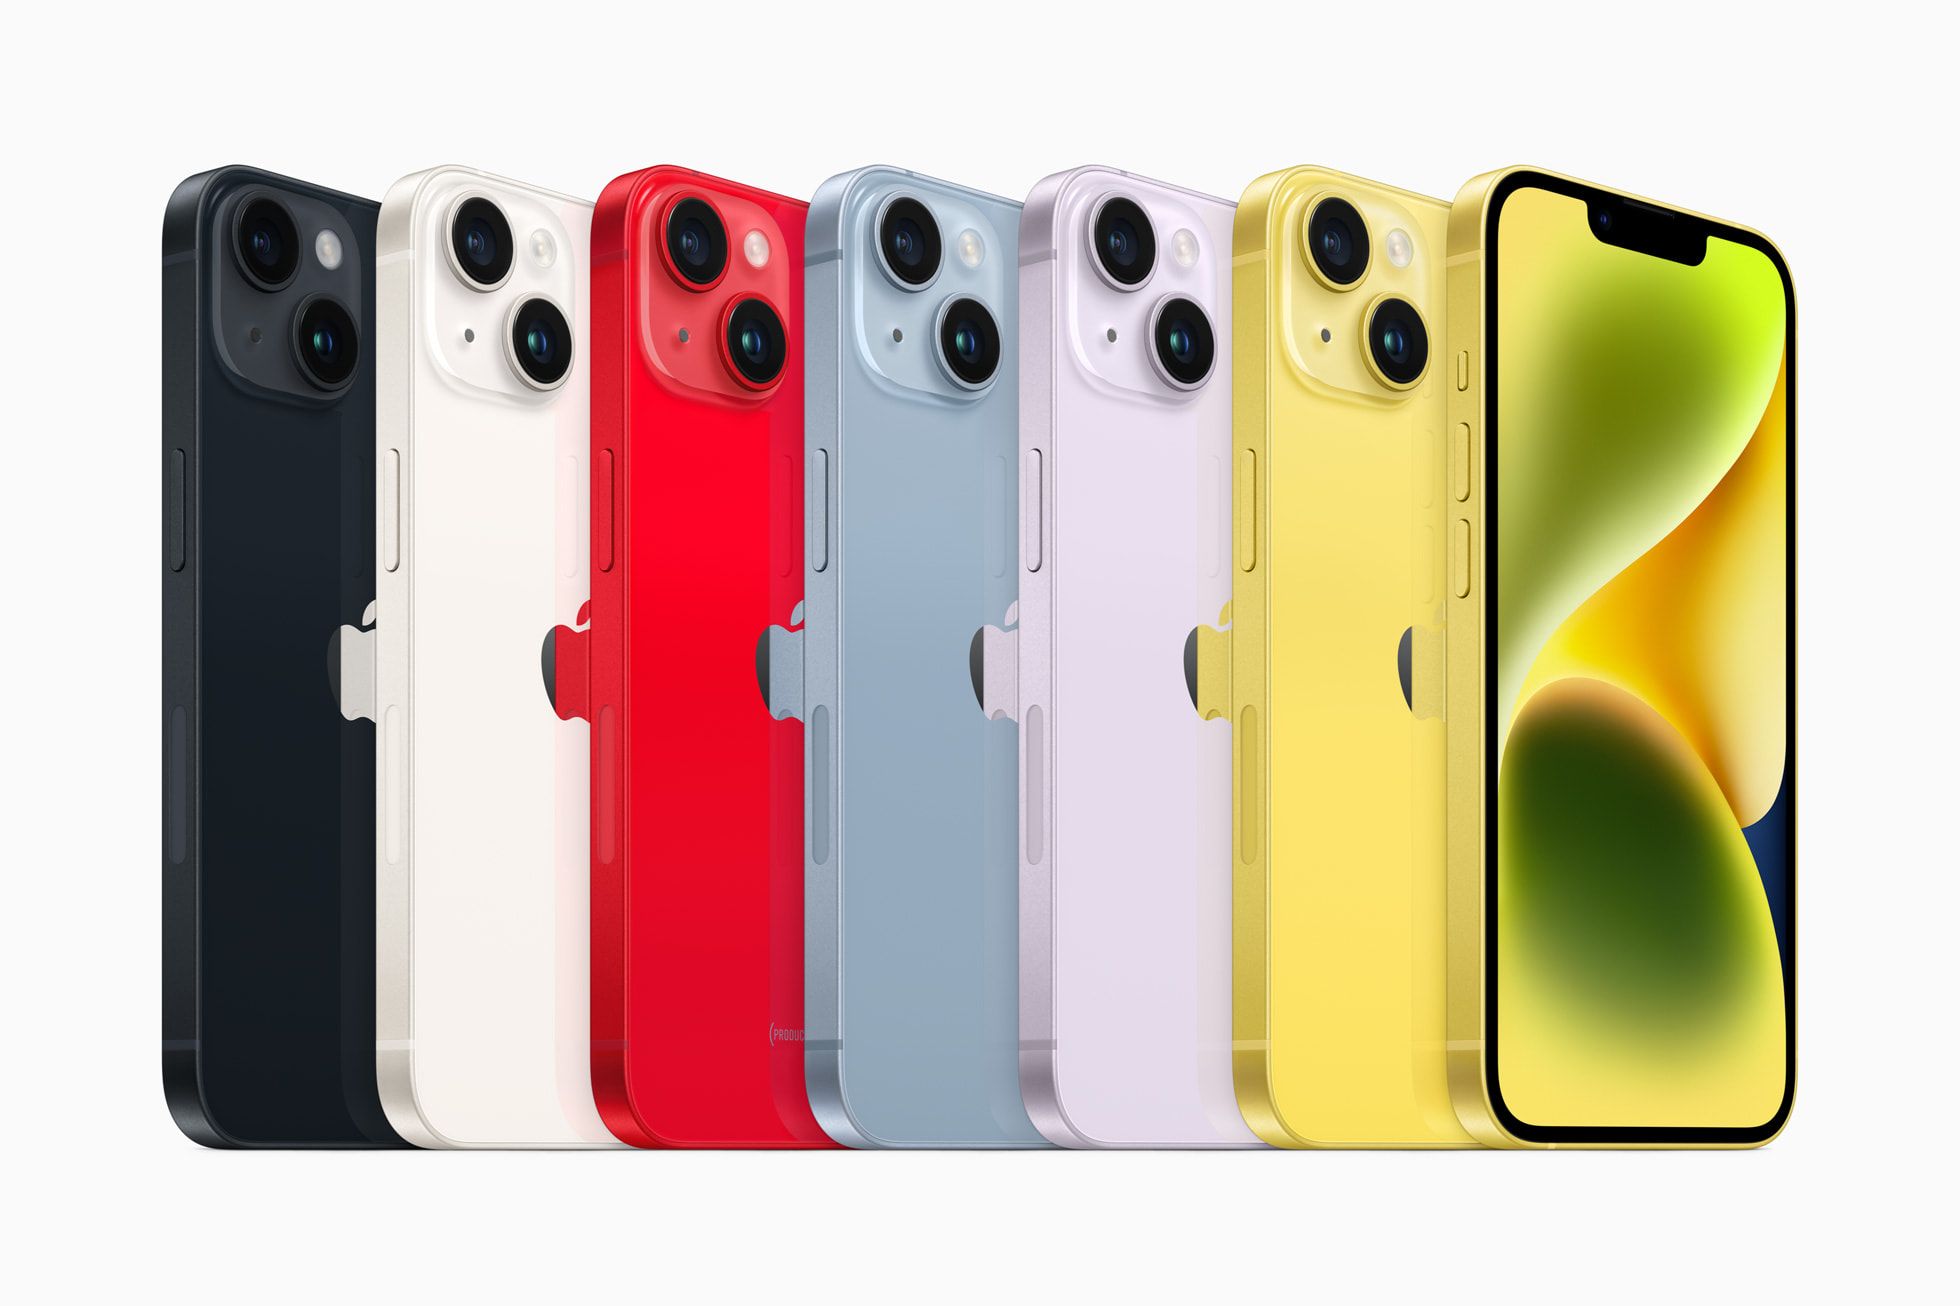 Apple iPhone 14 color lineup with seven colors.